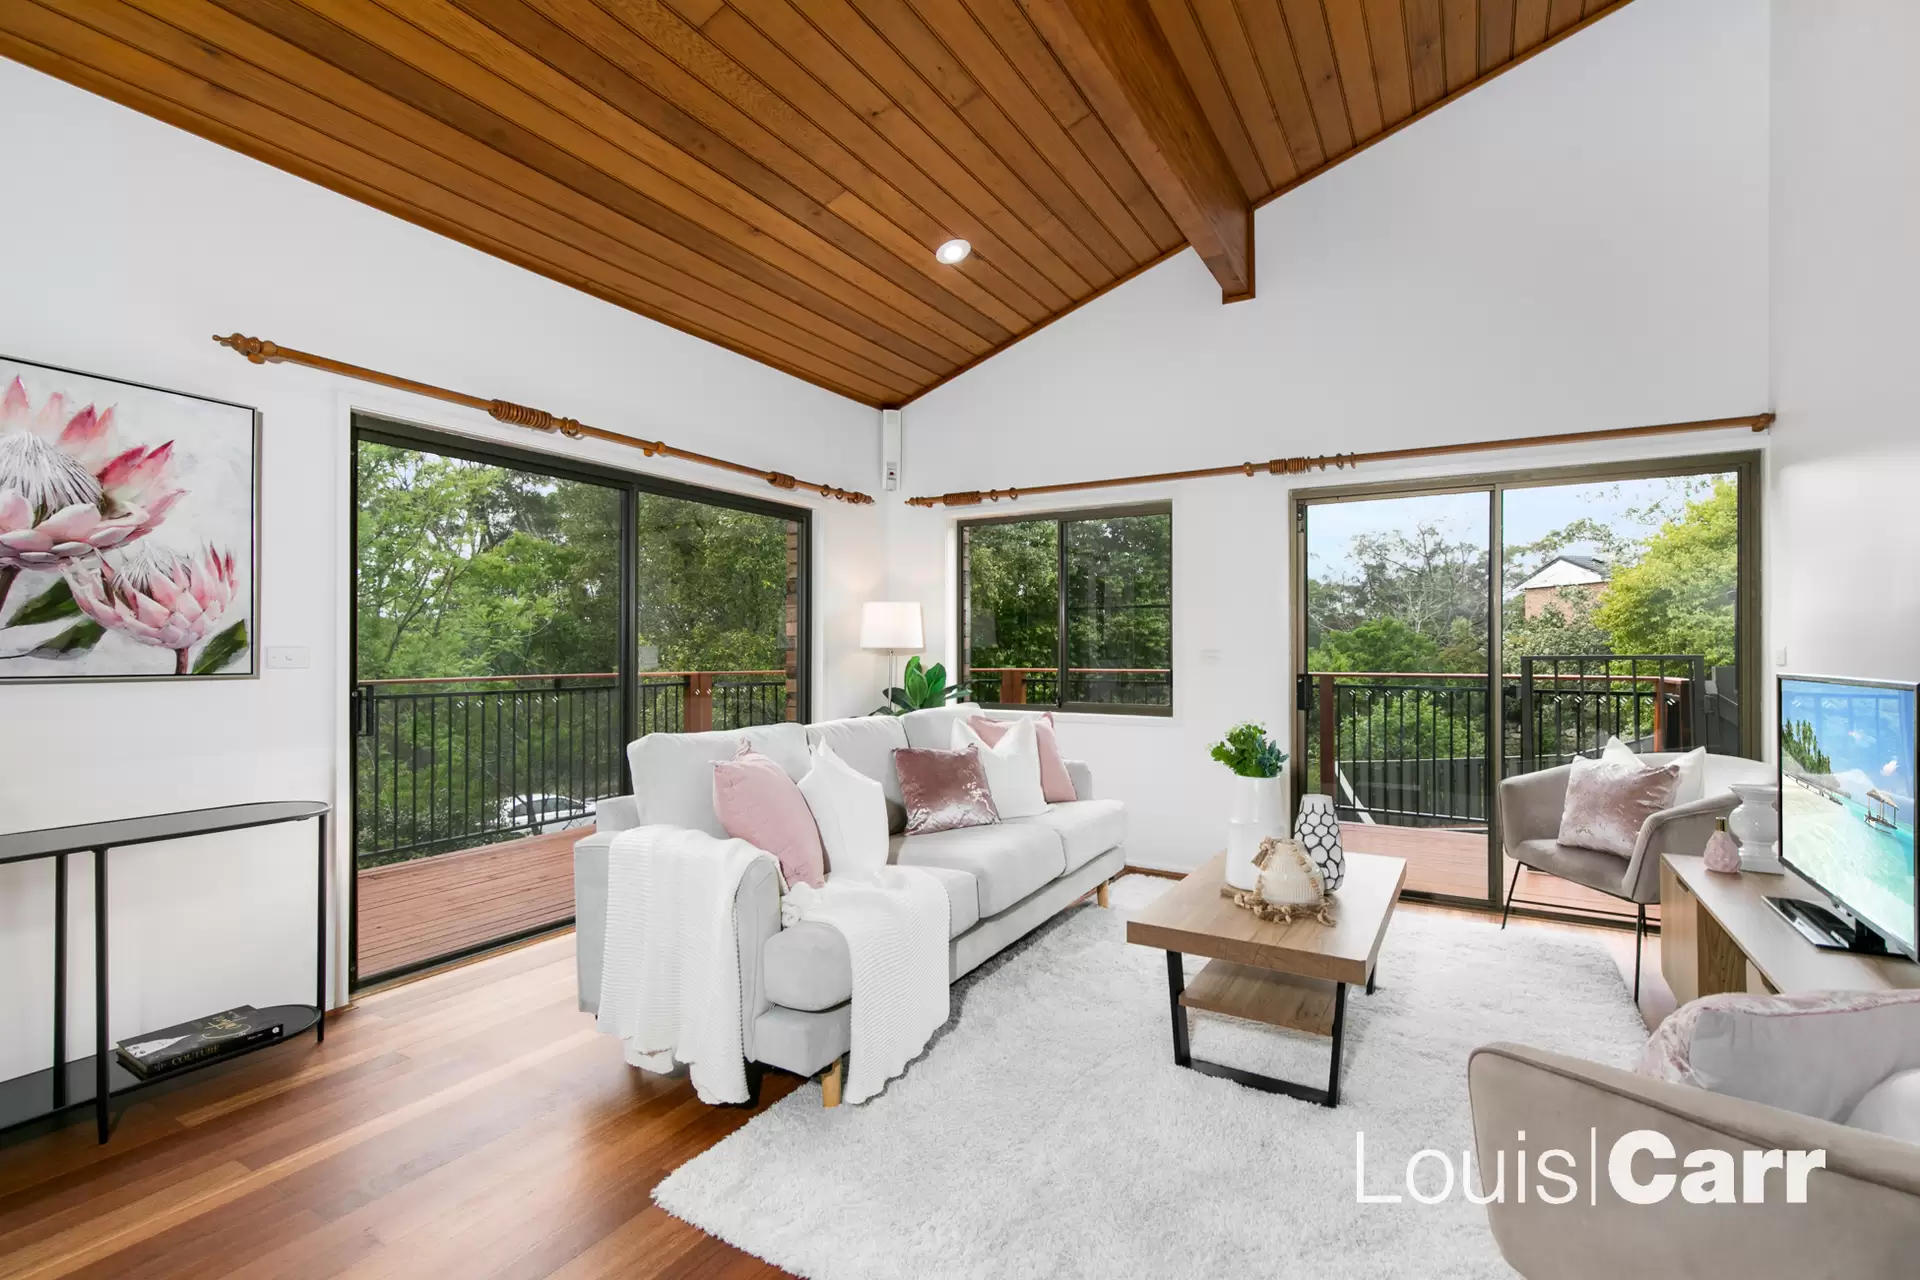 Photo #4: 2 Hoya Place, Cherrybrook - Sold by Louis Carr Real Estate